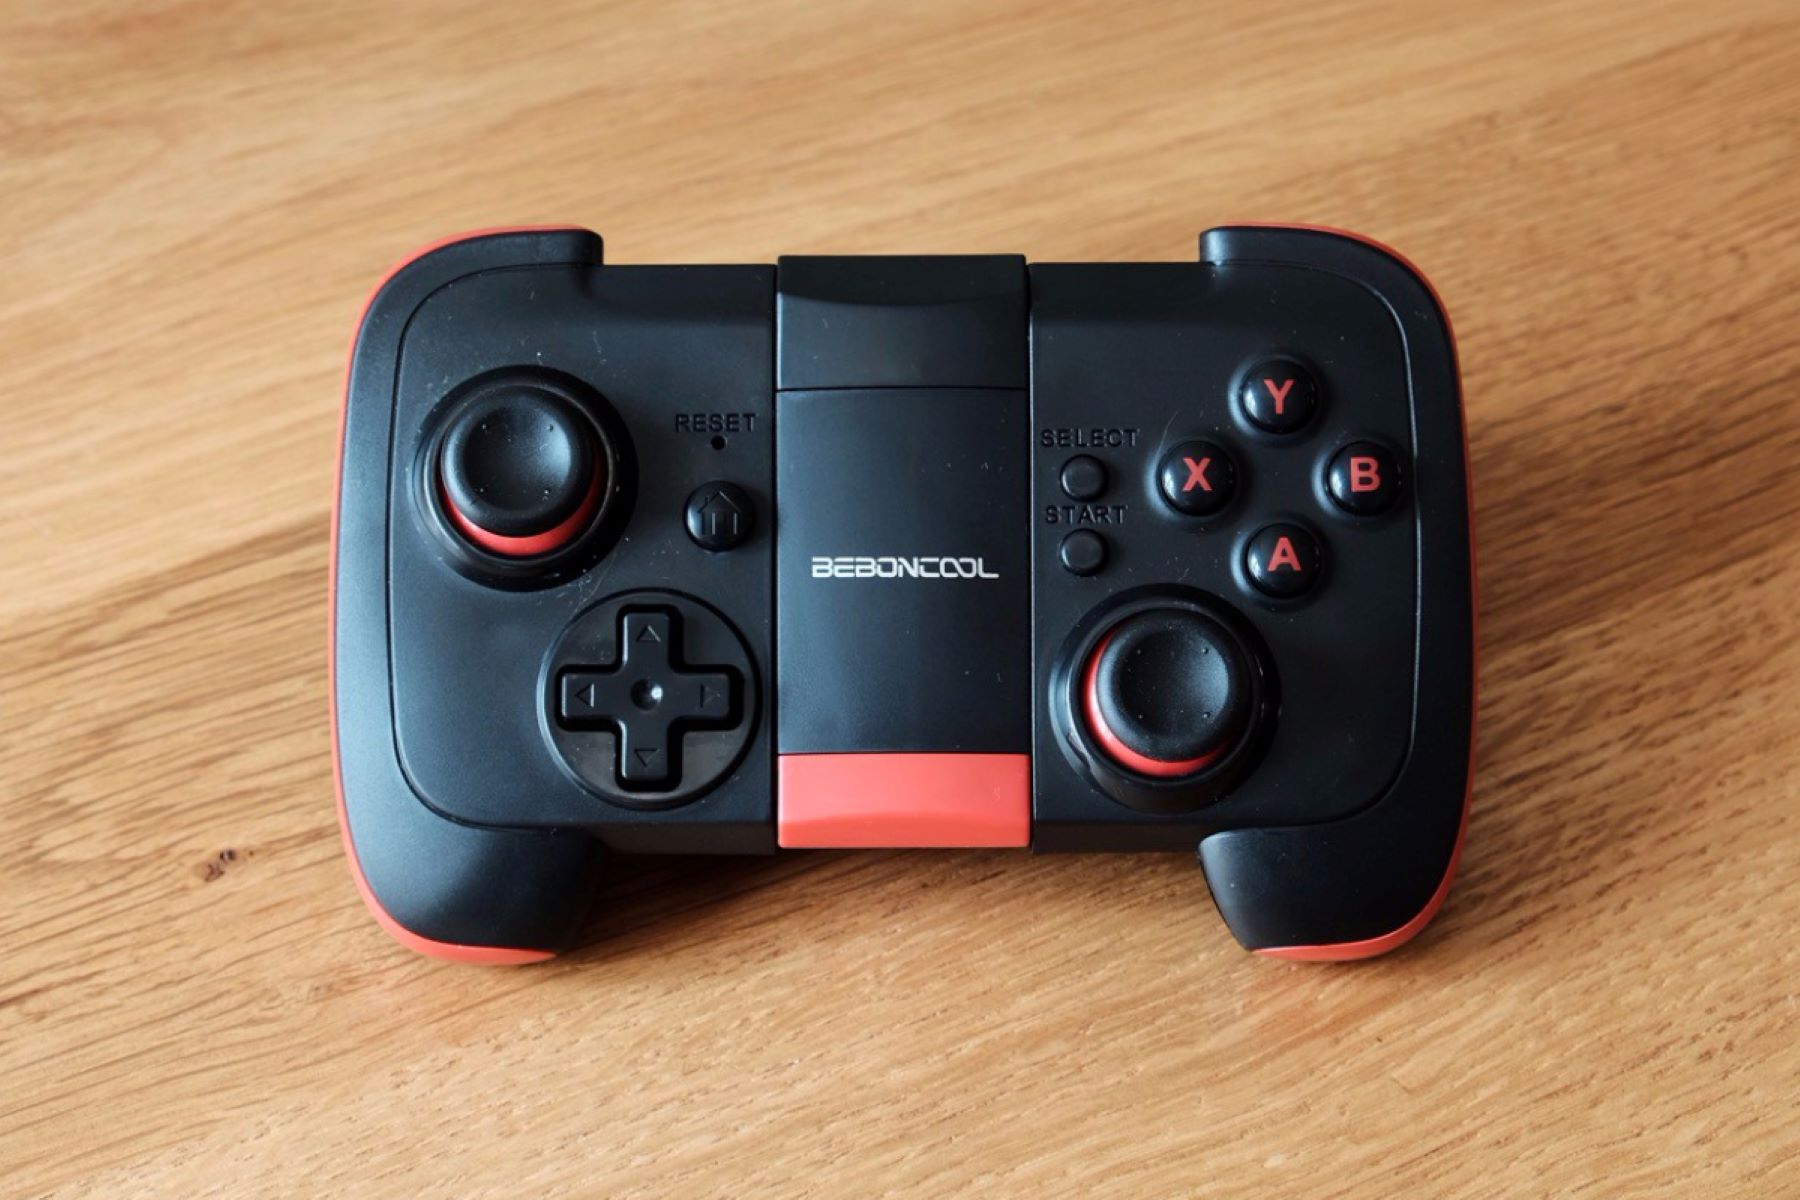 How To Pair Beboncool BBC Game Controller